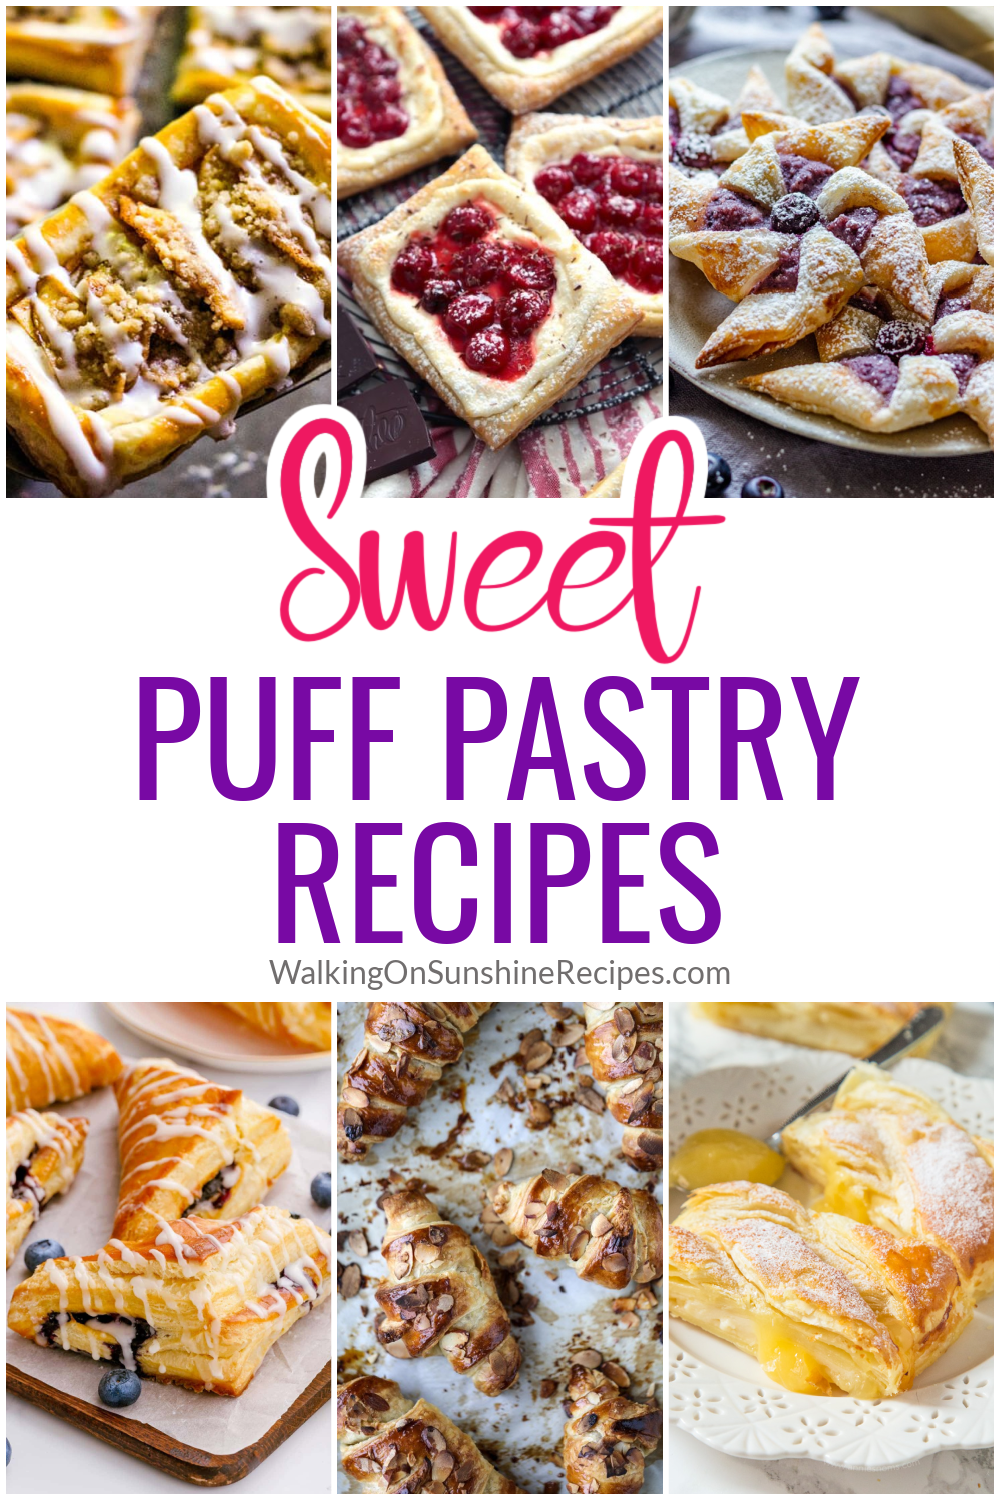 puff pastry ideas sweet.